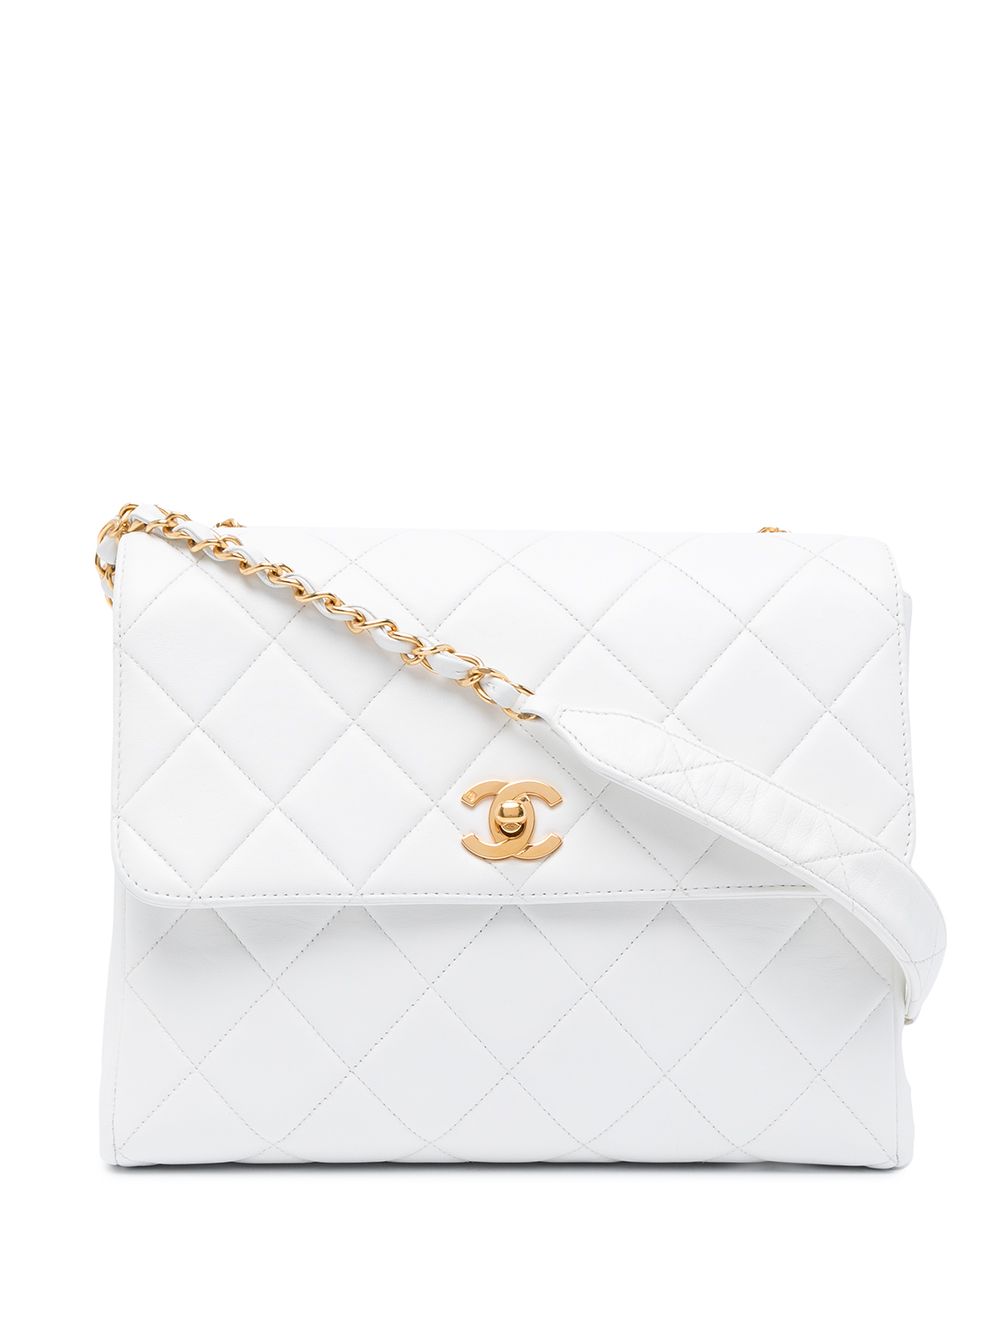 CHANEL Pre-Owned 1995 CC diamond-quilted Shoulder Bag - Farfetch